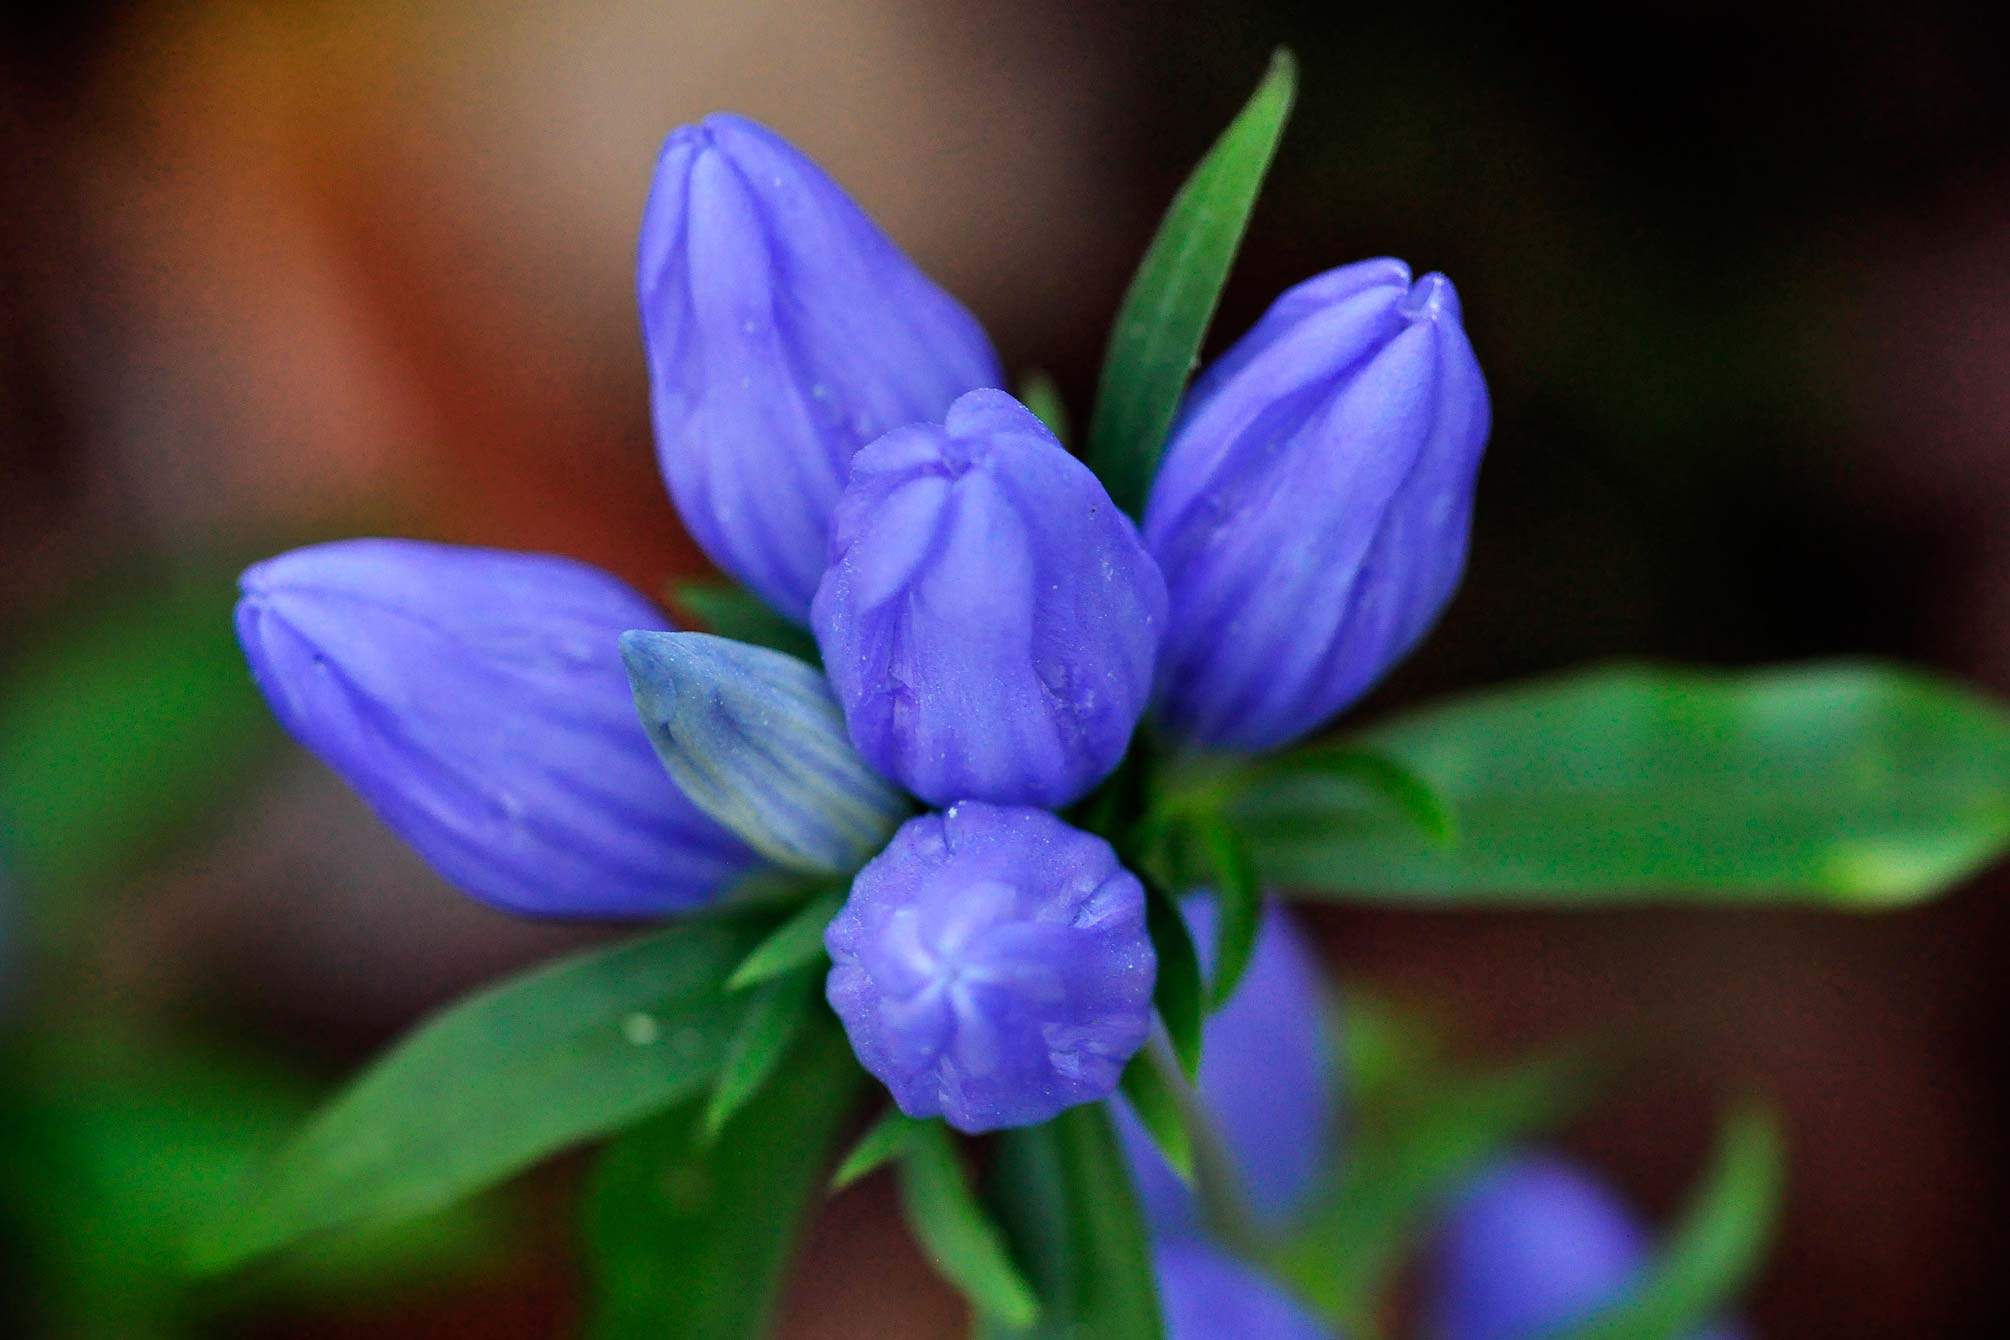 gentian with closed petals